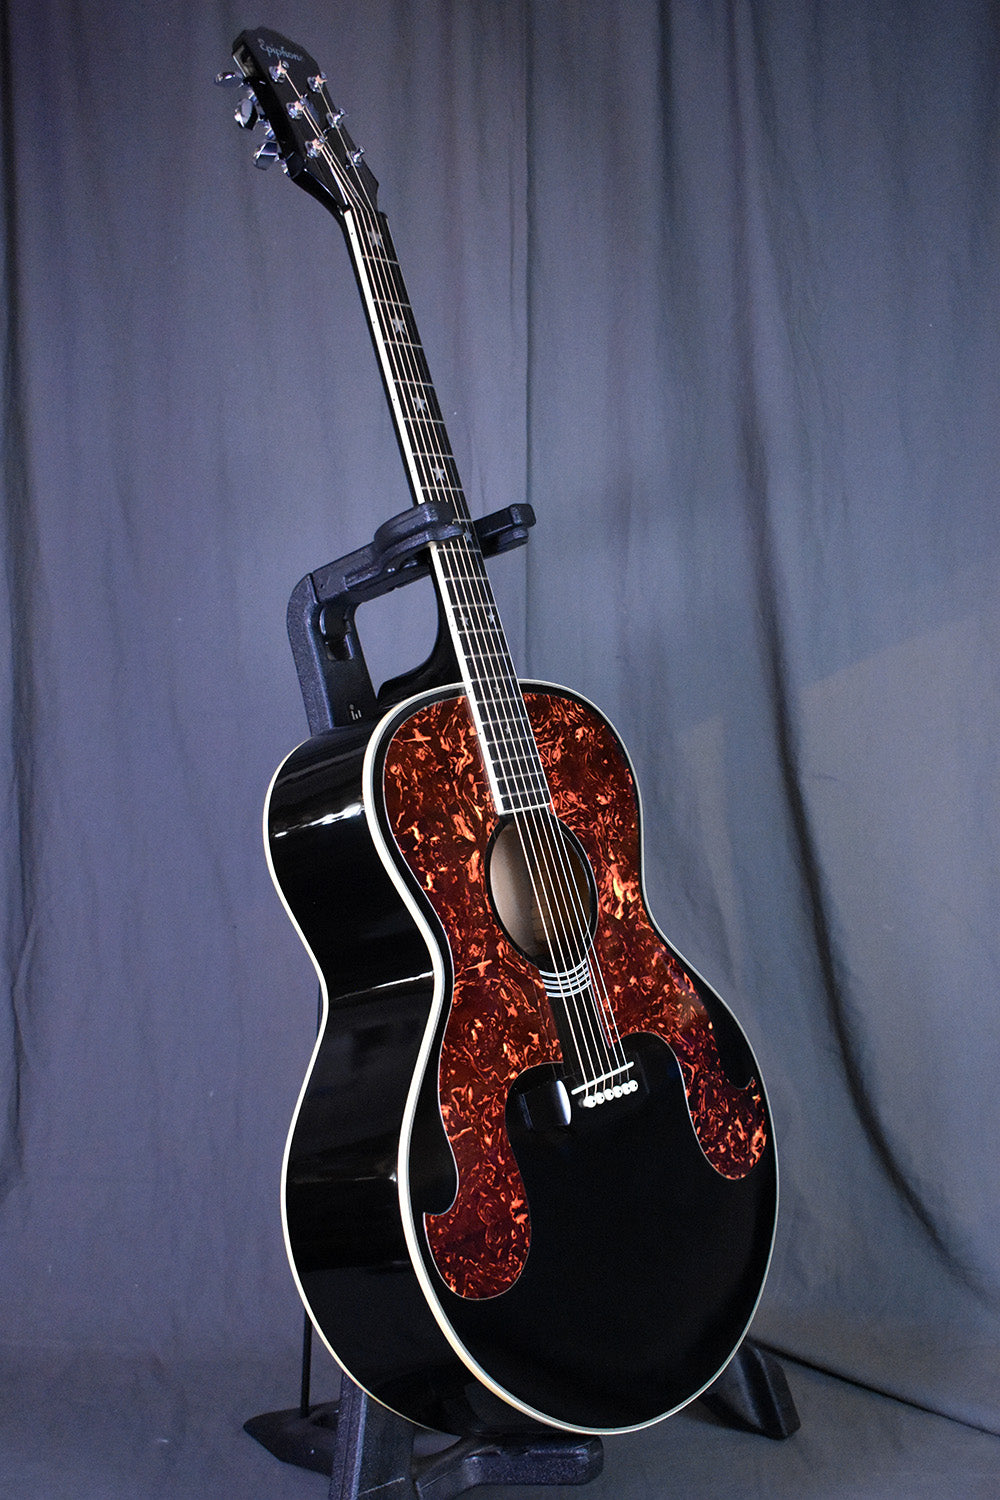 1991 Epiphone SQ-180 Everly Brothers – Telluride Music Co.